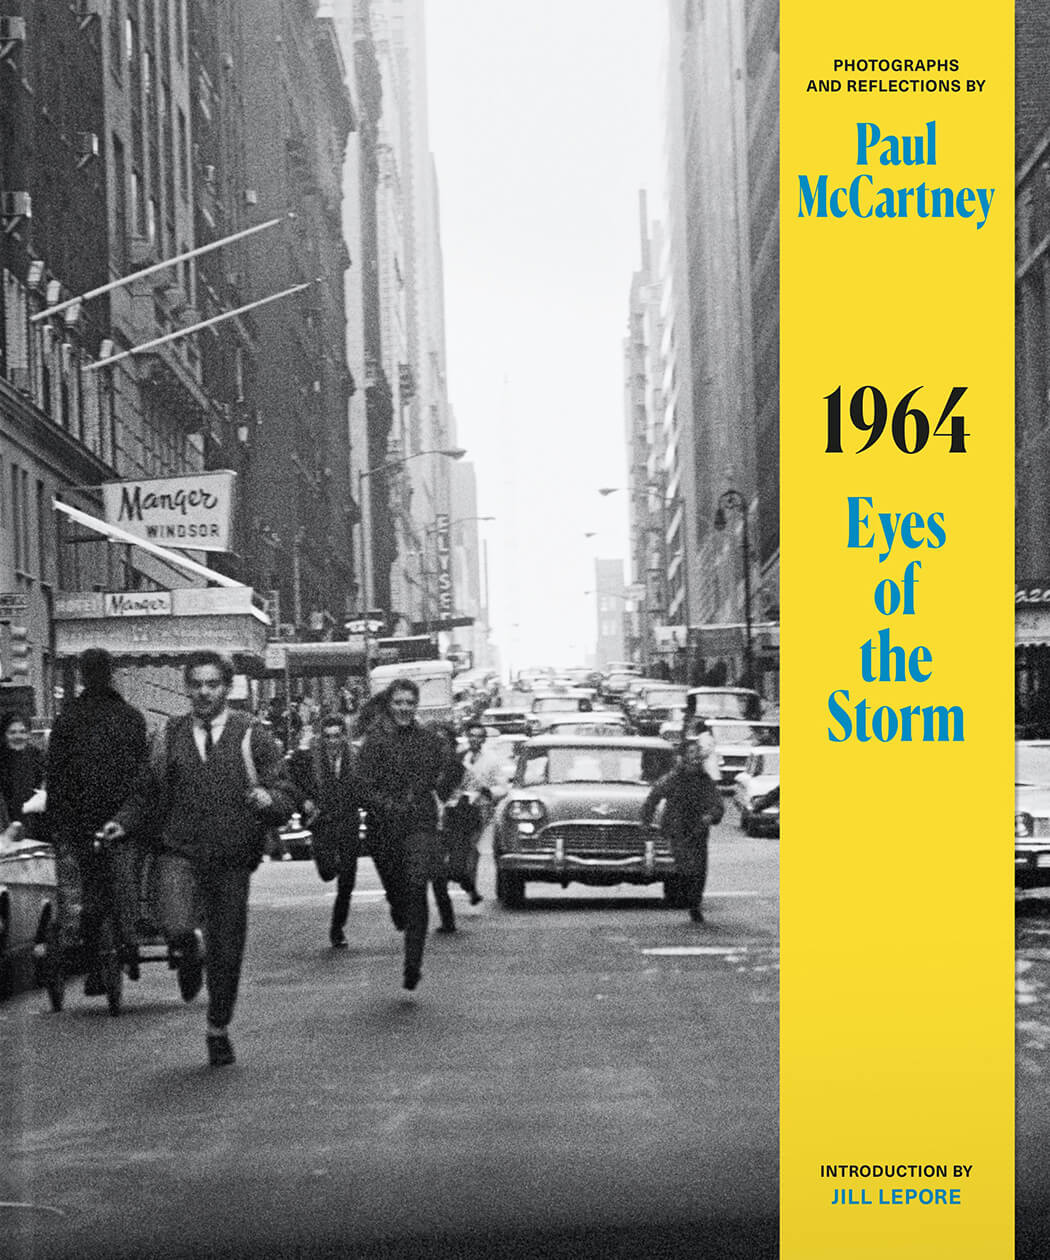 the official cover of Paul McCartney's new photo book '1964: Eyes Of The Storm'